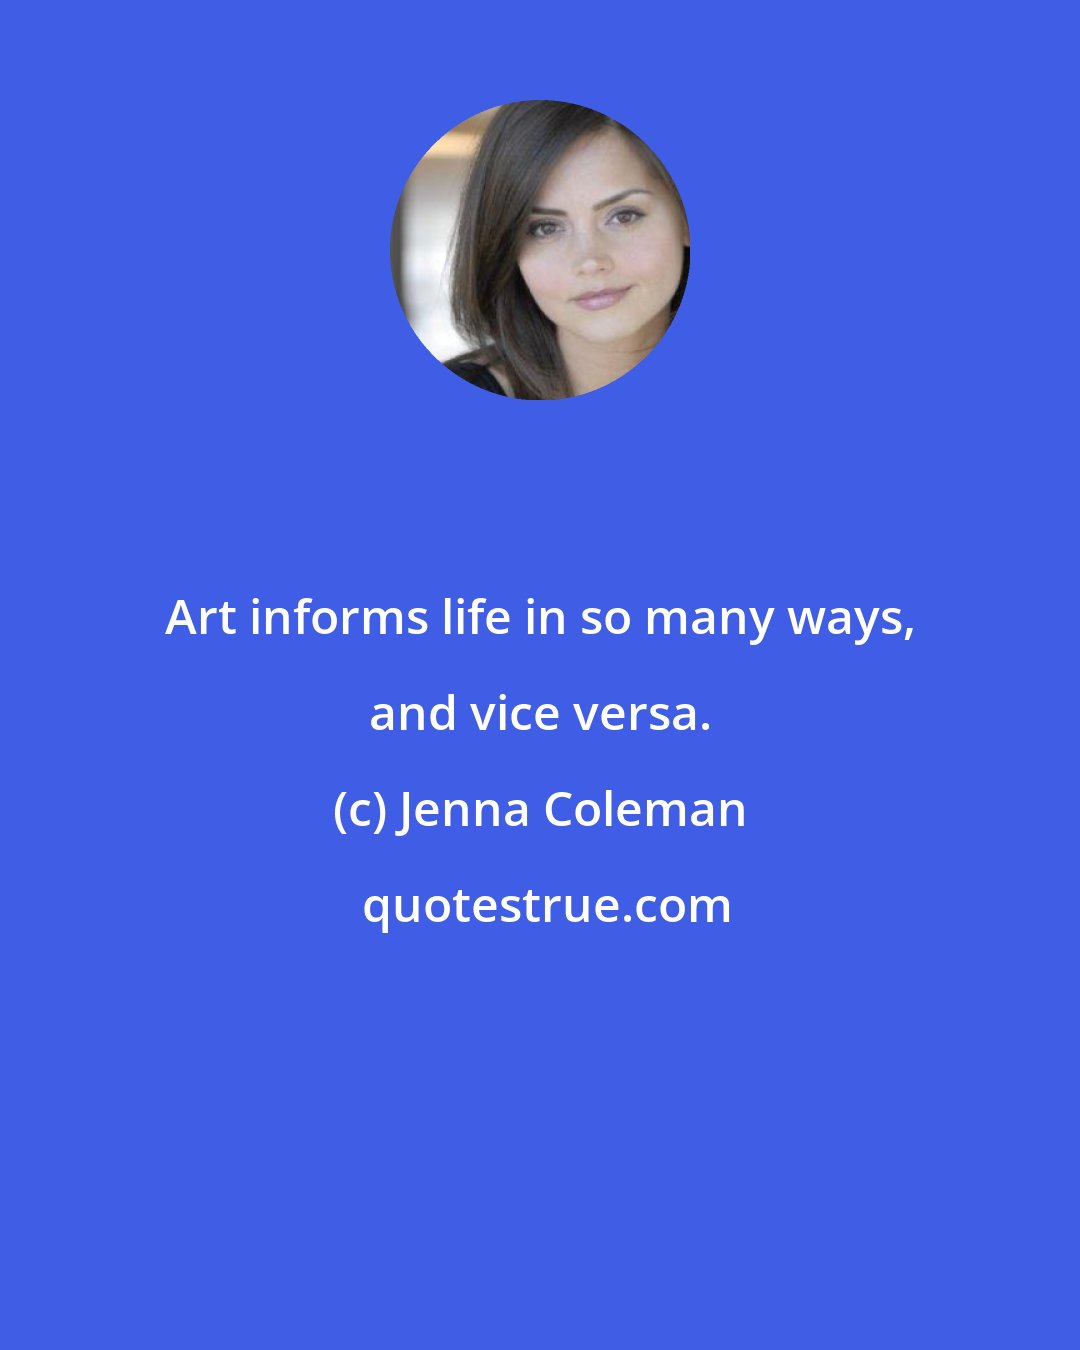 Jenna Coleman: Art informs life in so many ways, and vice versa.